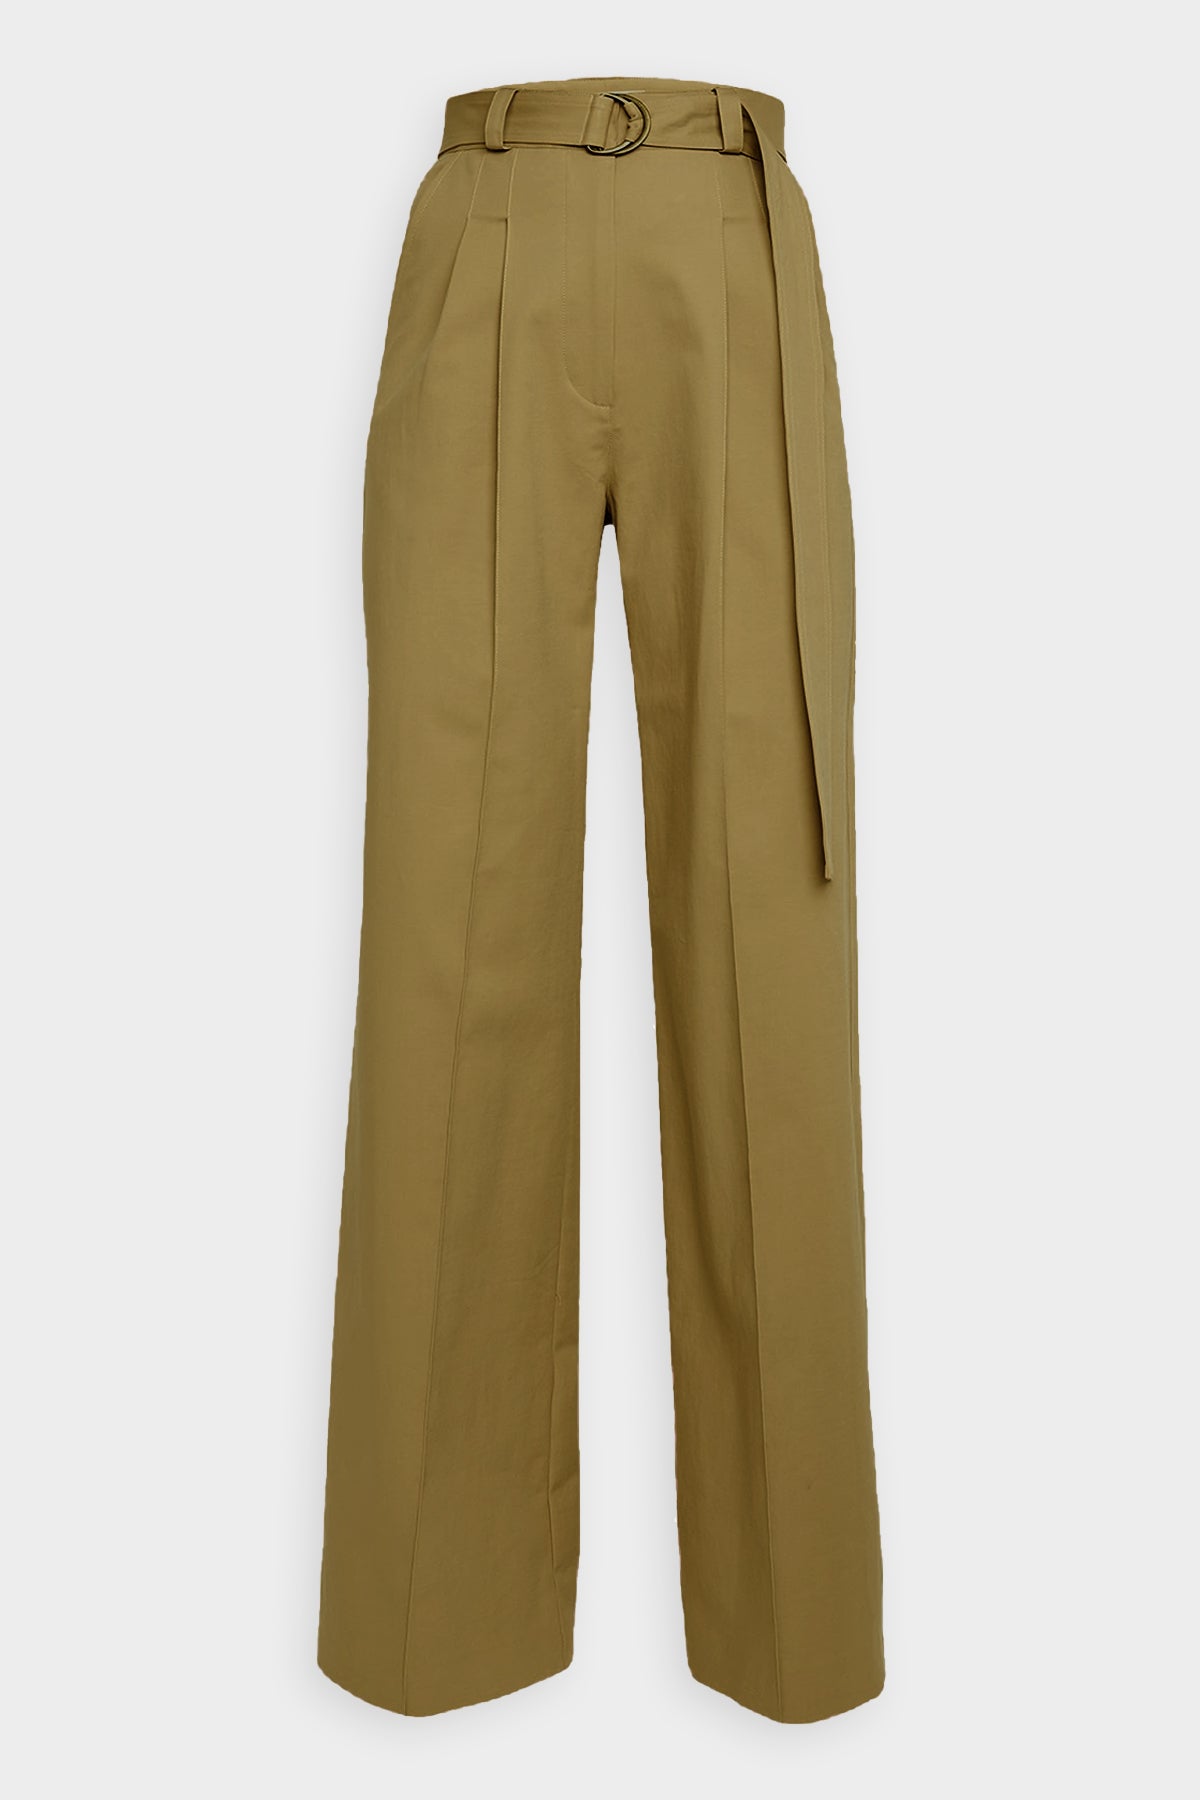 Pompeji trappe G Nico Pant in Willow